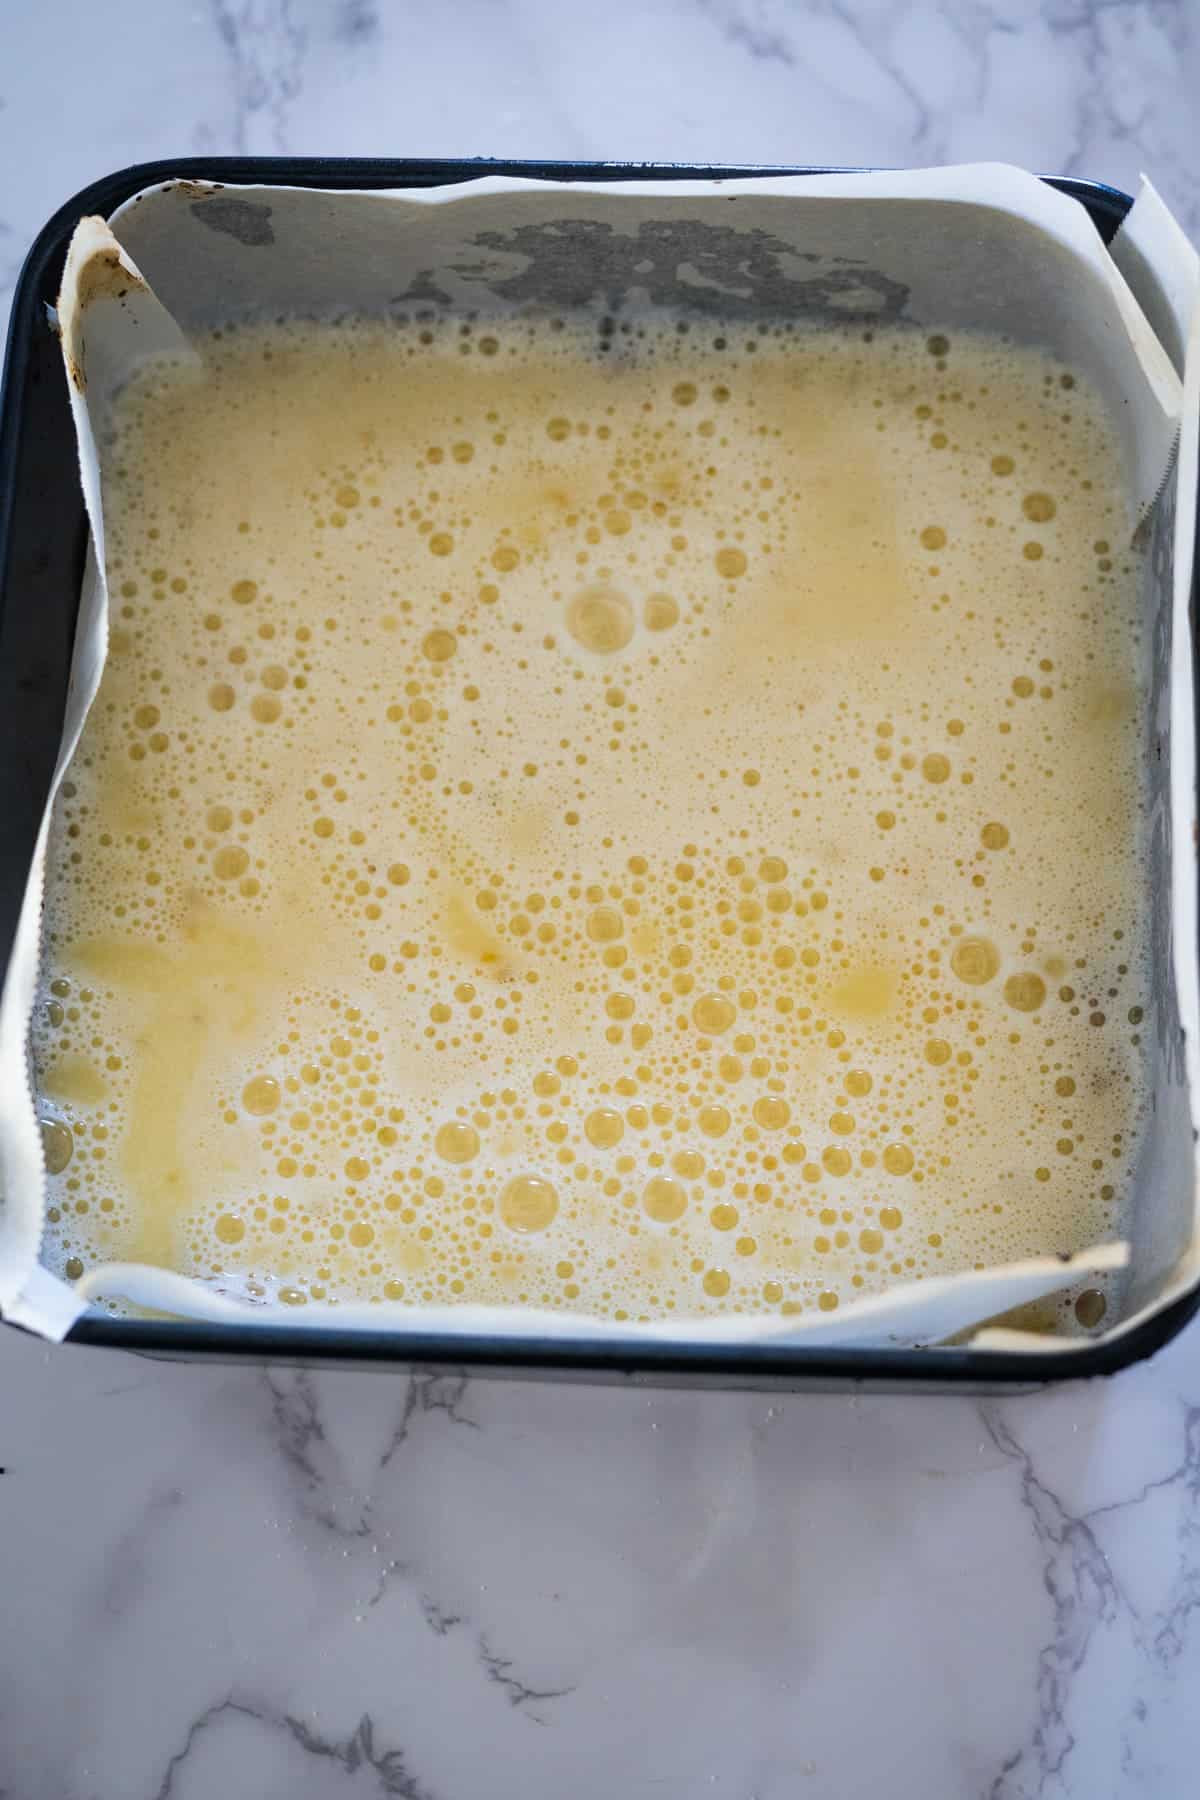 A pan of food with a white paper and yellow liquid.